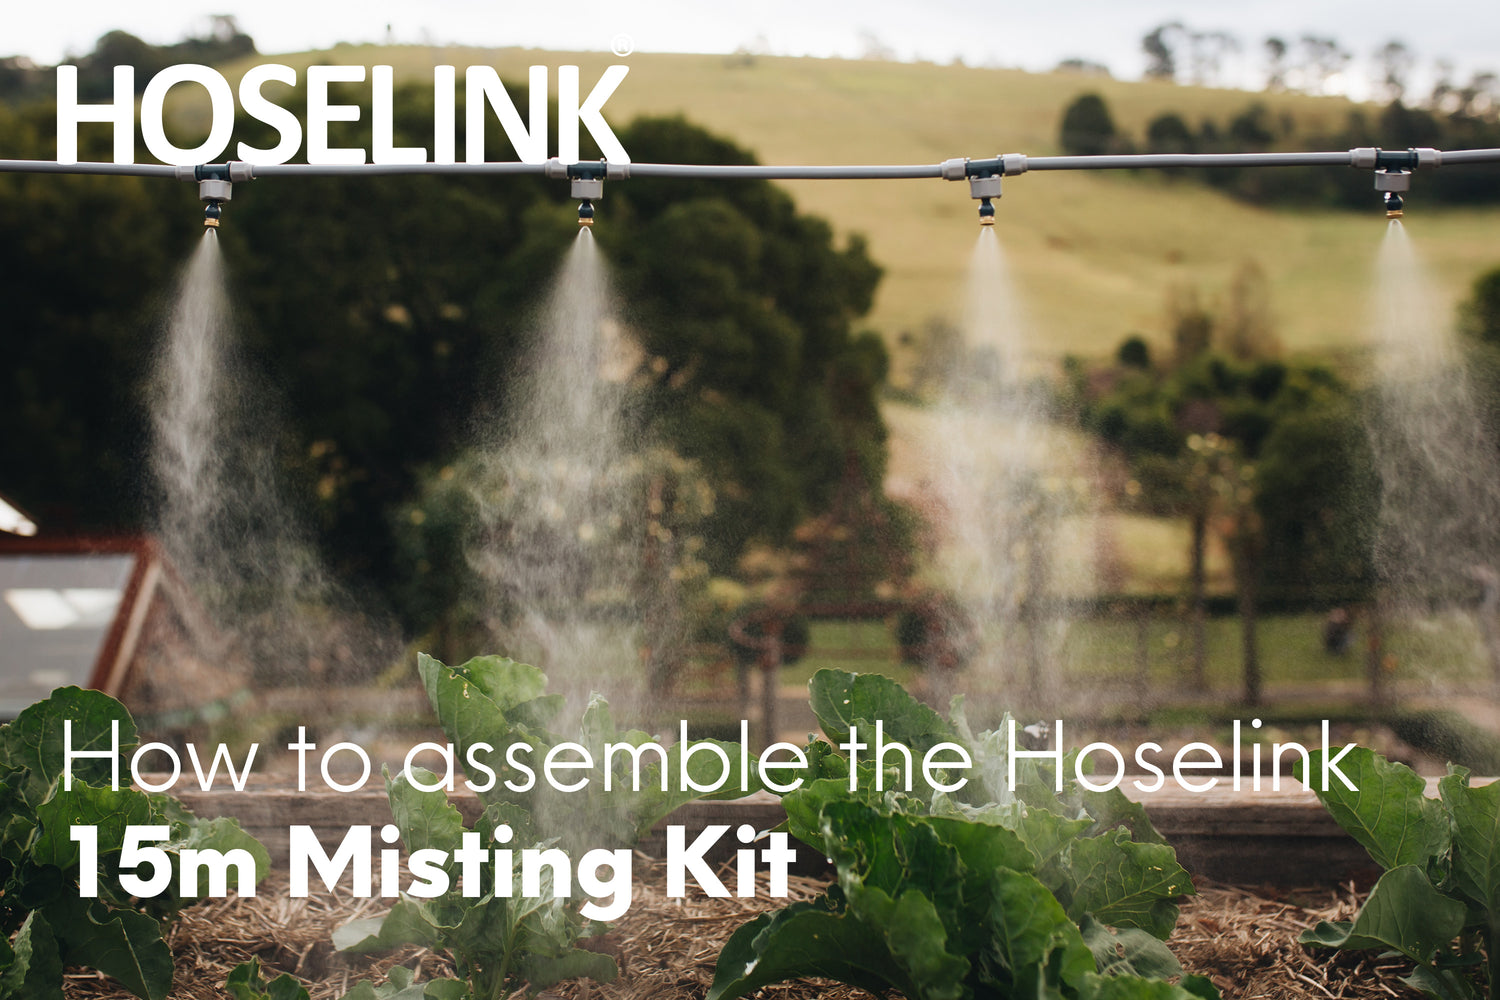 How to Assemble the Hoselink 15m Misting Kit